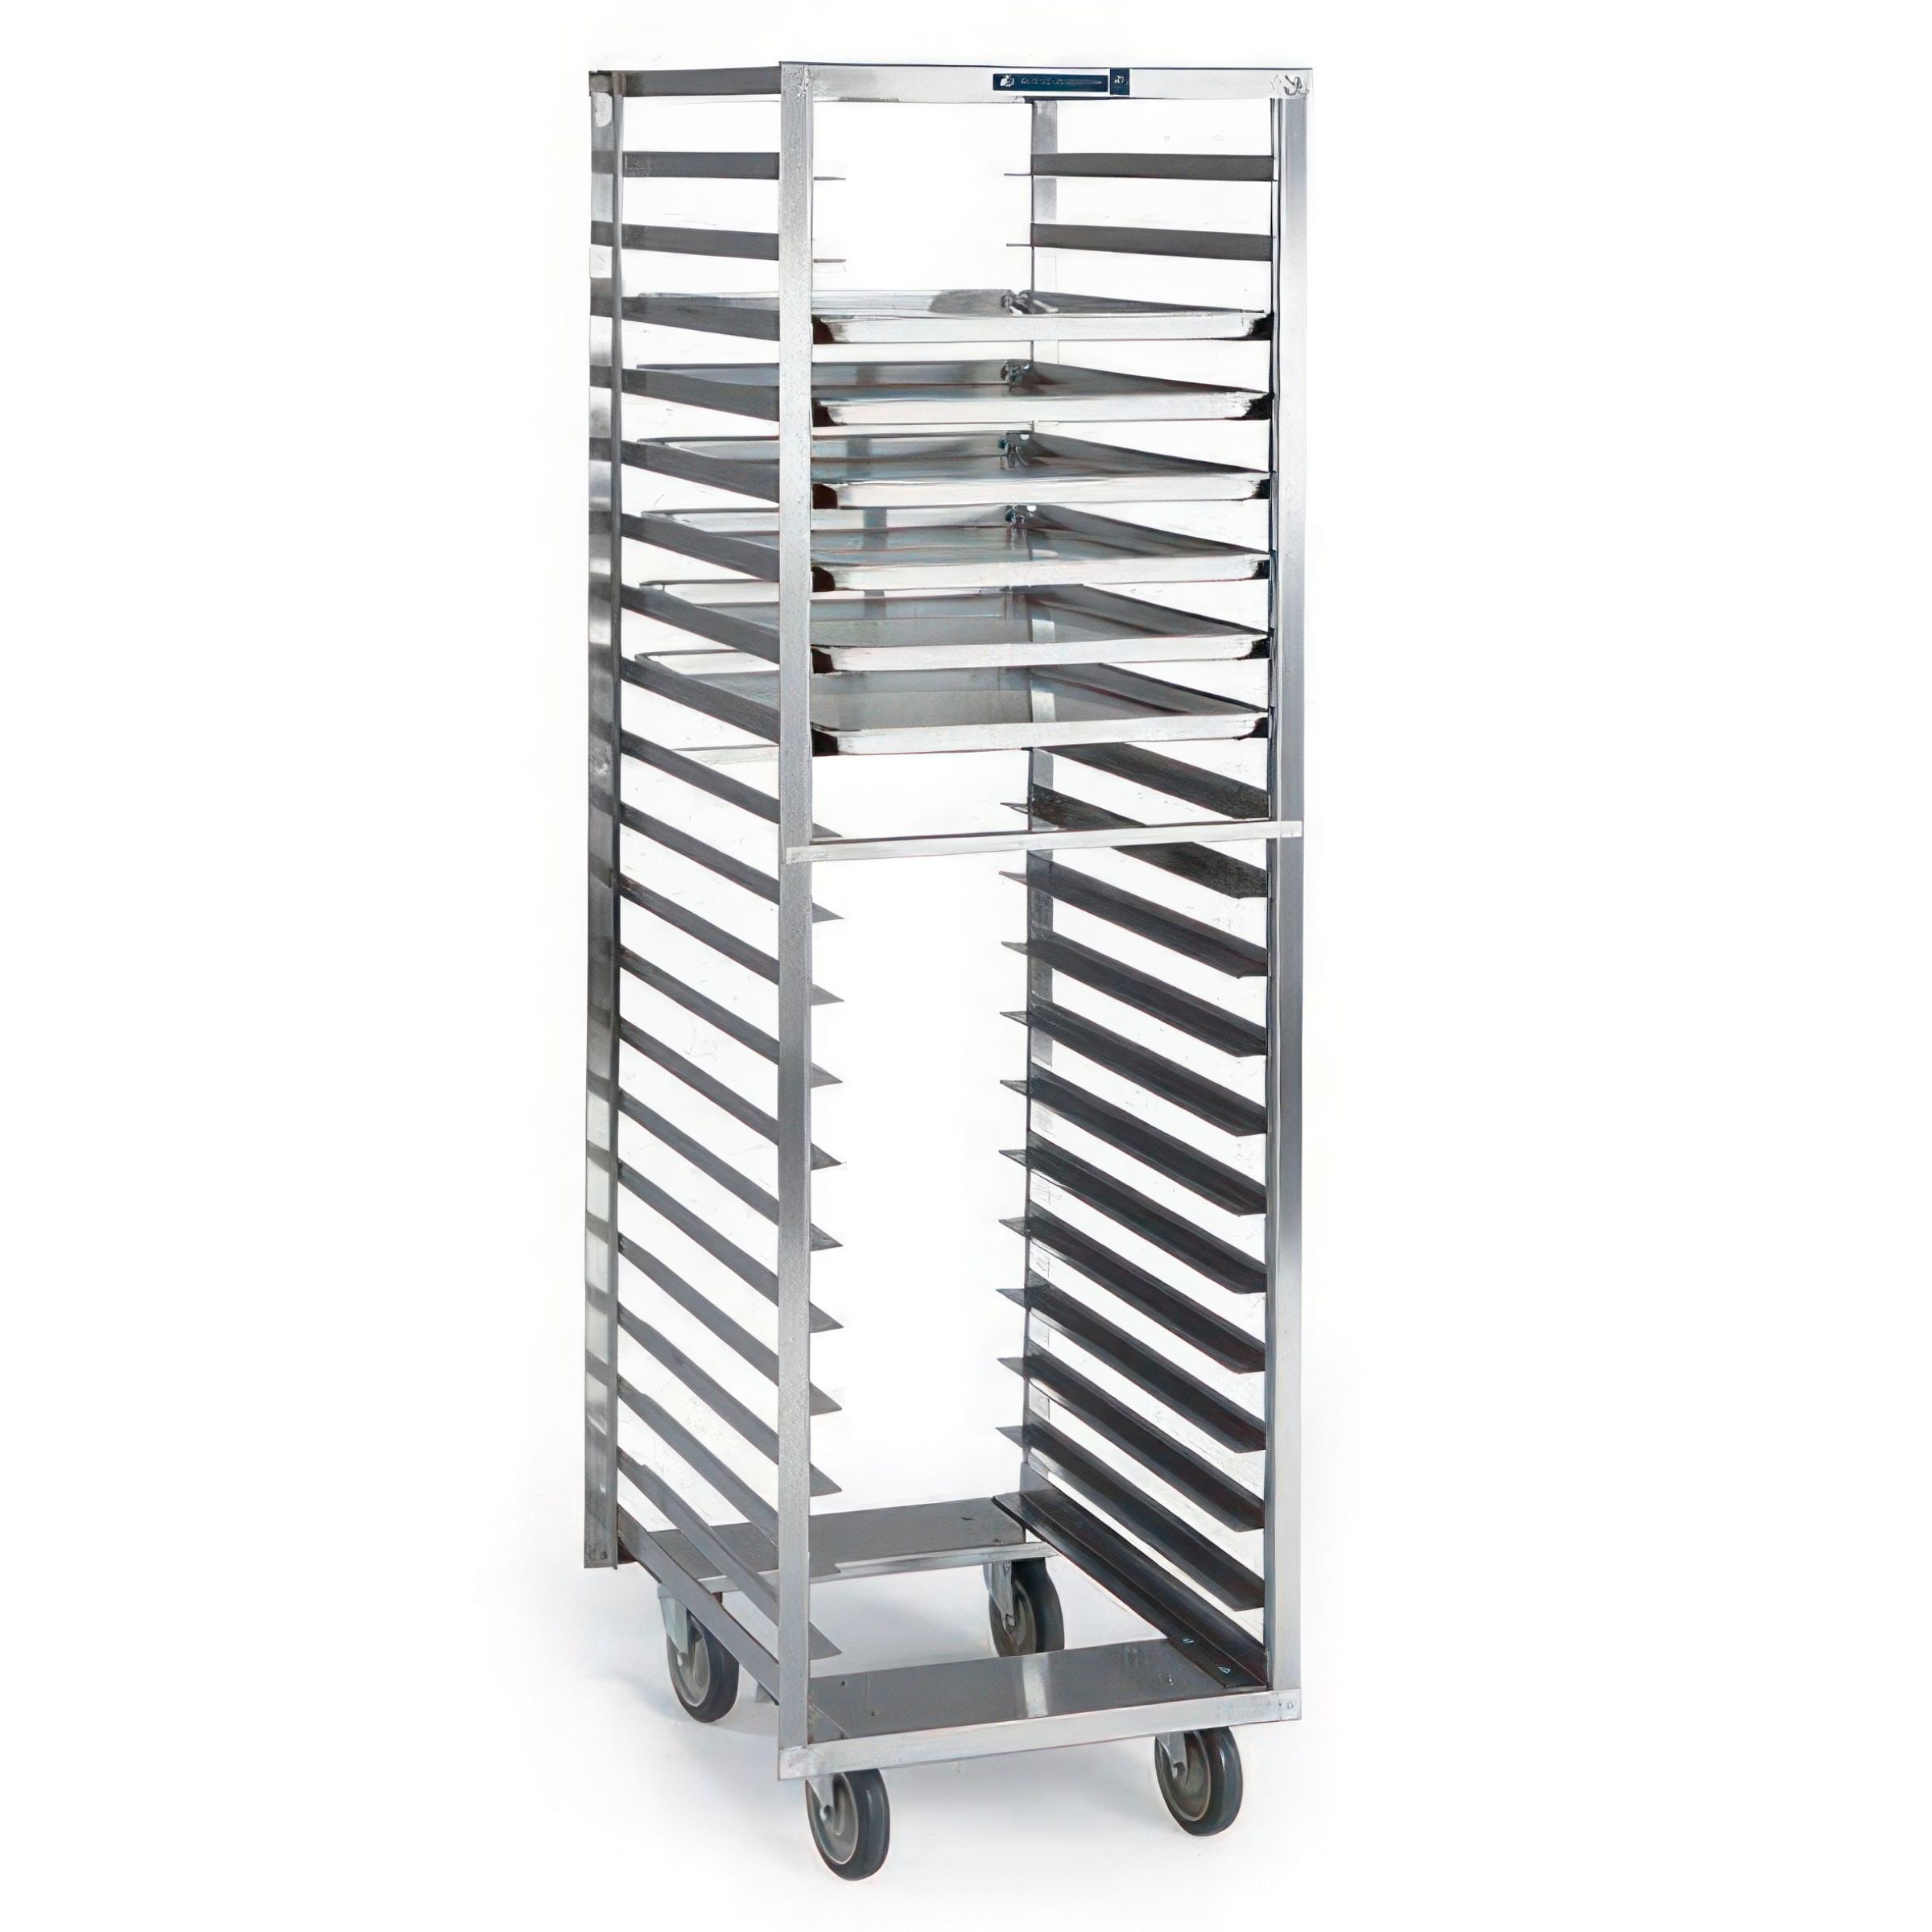 Lakeside 179 Tray Rack, Stainless Steel, (12) 15 x 20-in Tray Capacity -  Lakeside Foodservice